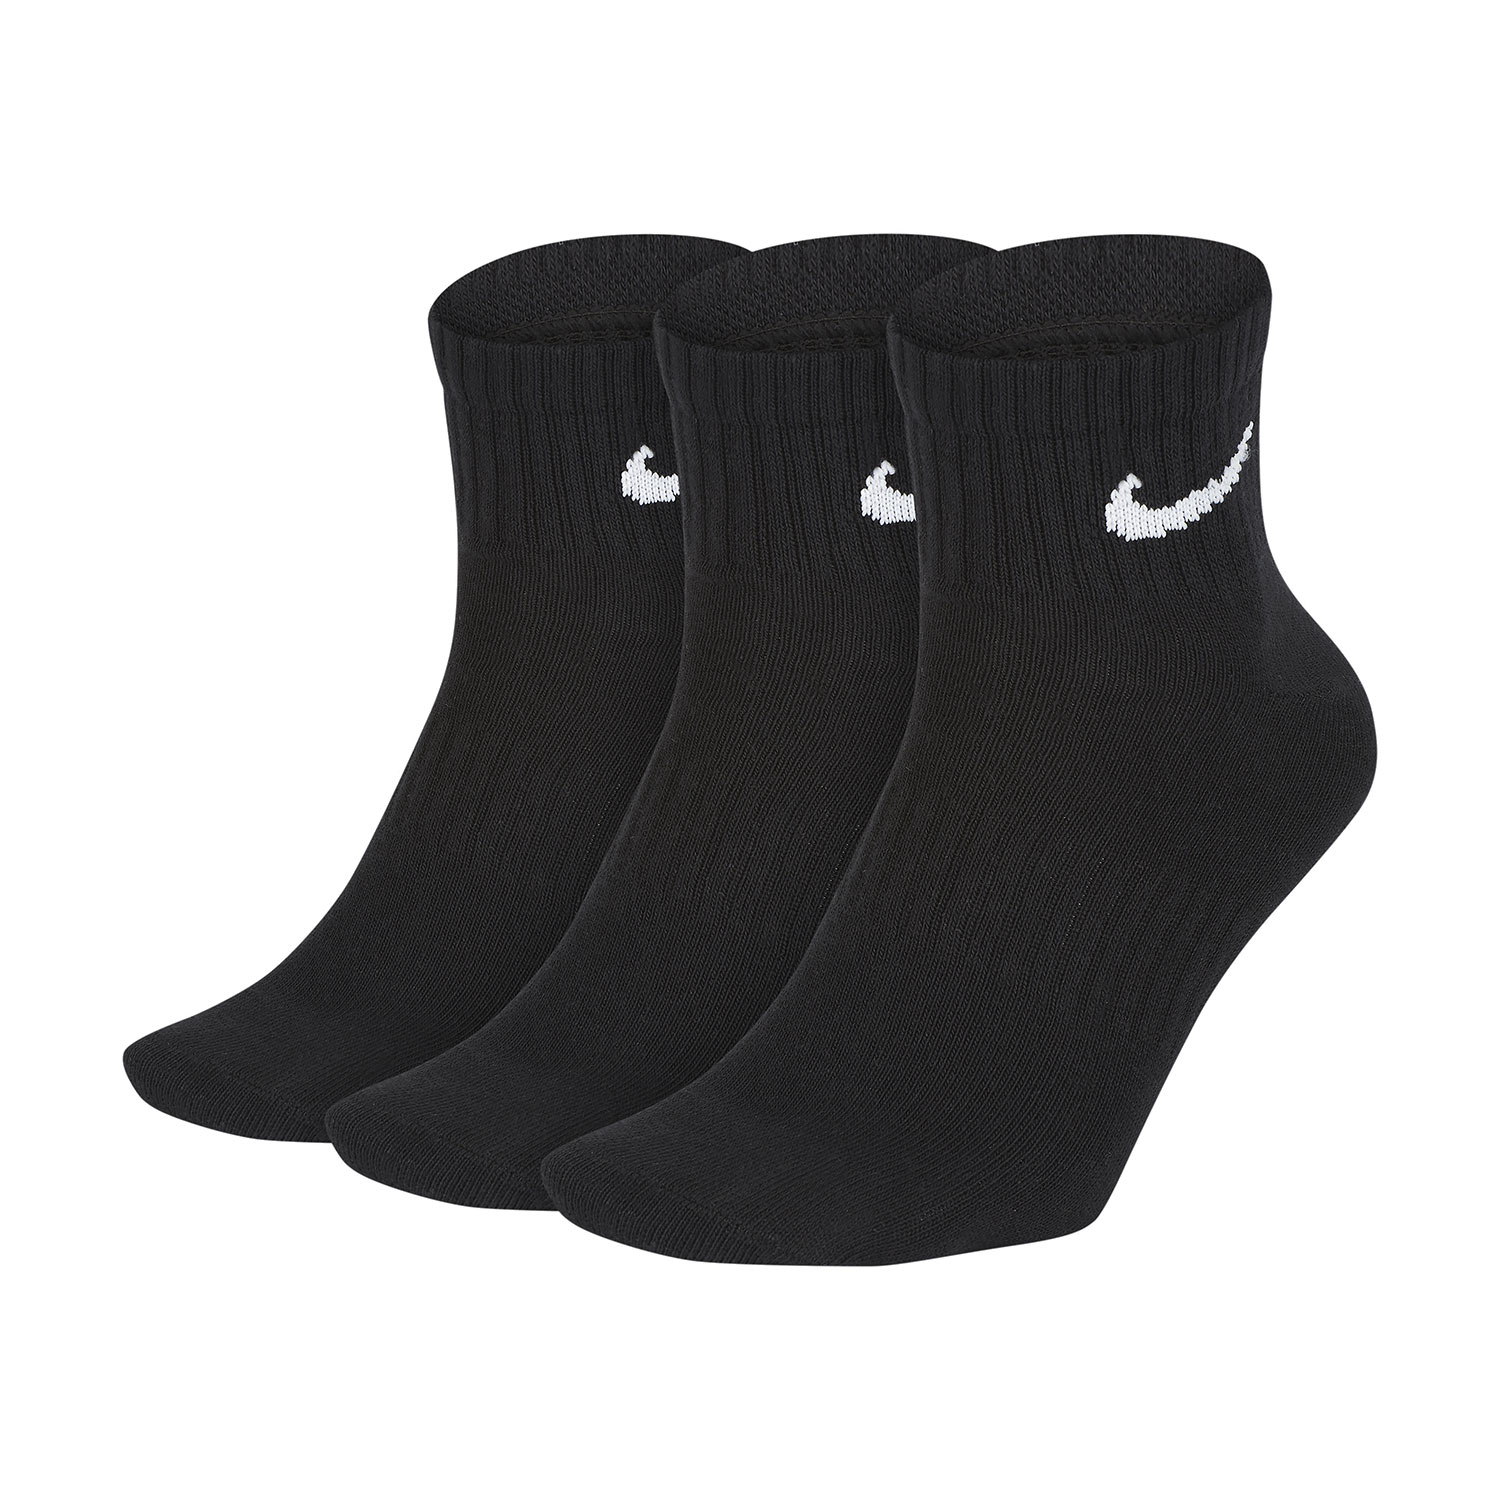 Nike Everyday Light Weight x 3 Calcetines - Black/White